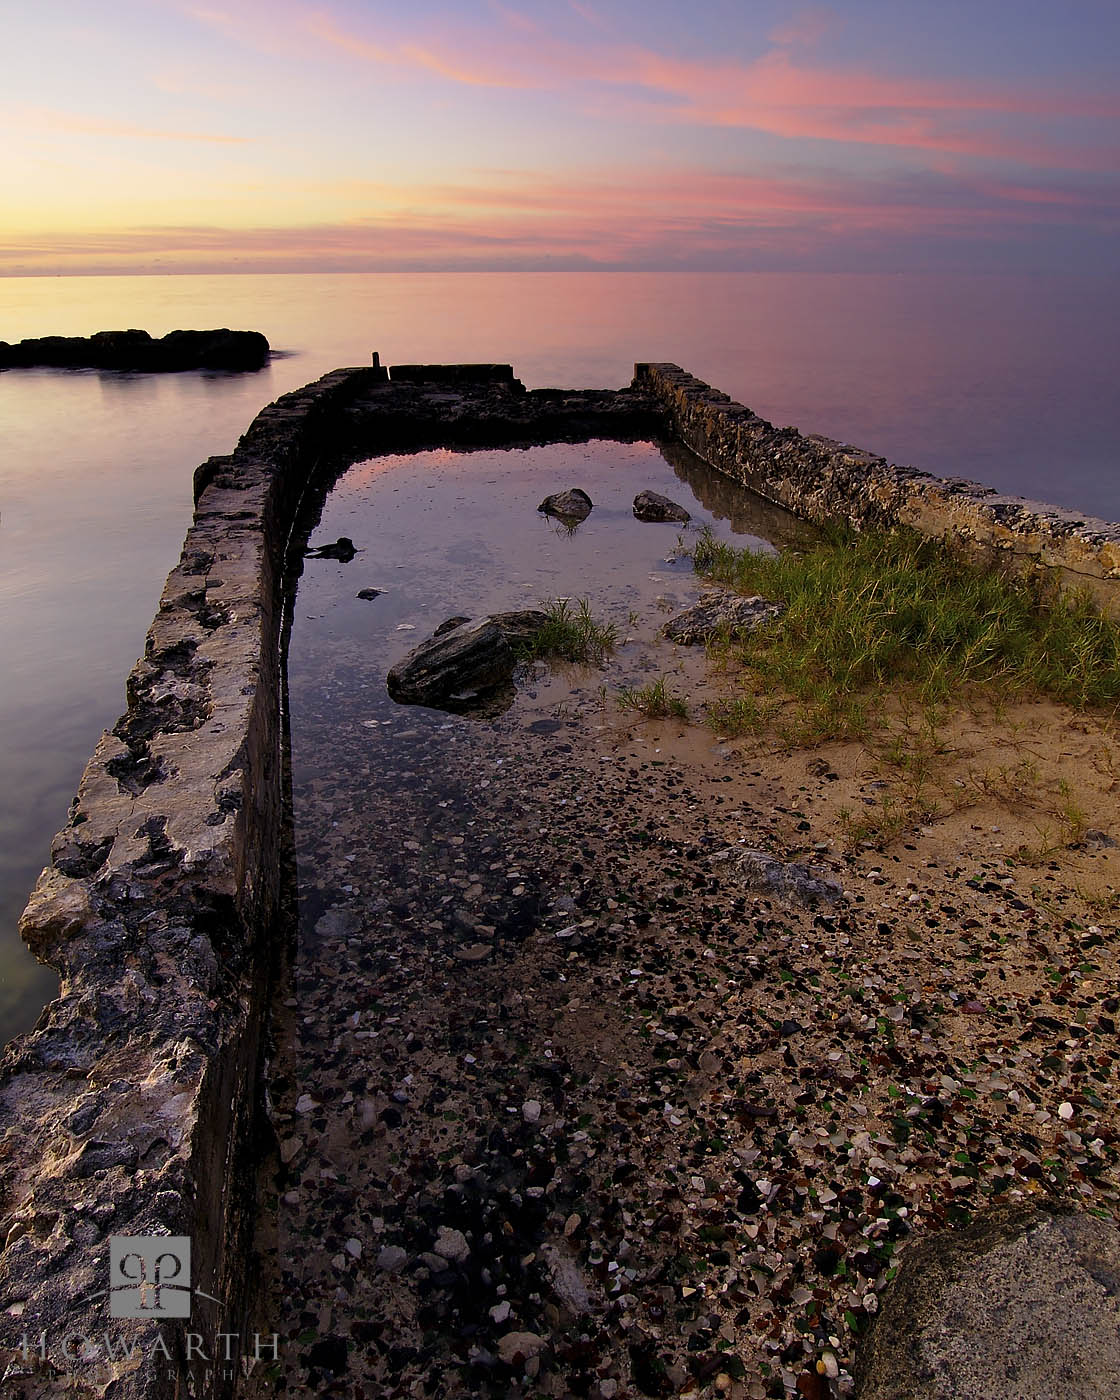 The remnants of an old pier just out into the setting sun